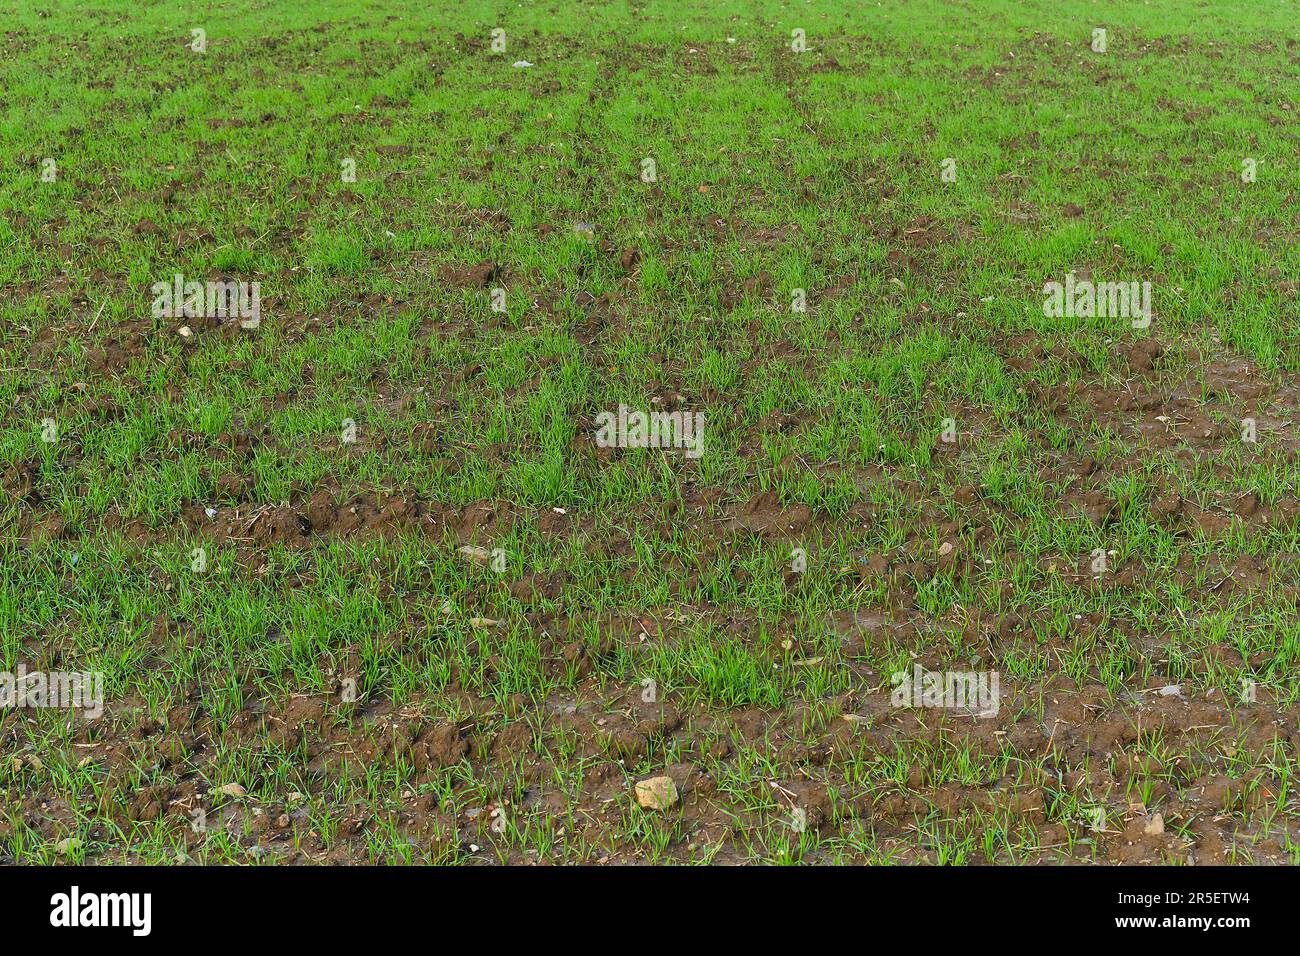 Green field on an eco-farm with young sprouts of wheat or cereal crops background, selective focus. Stock Photo